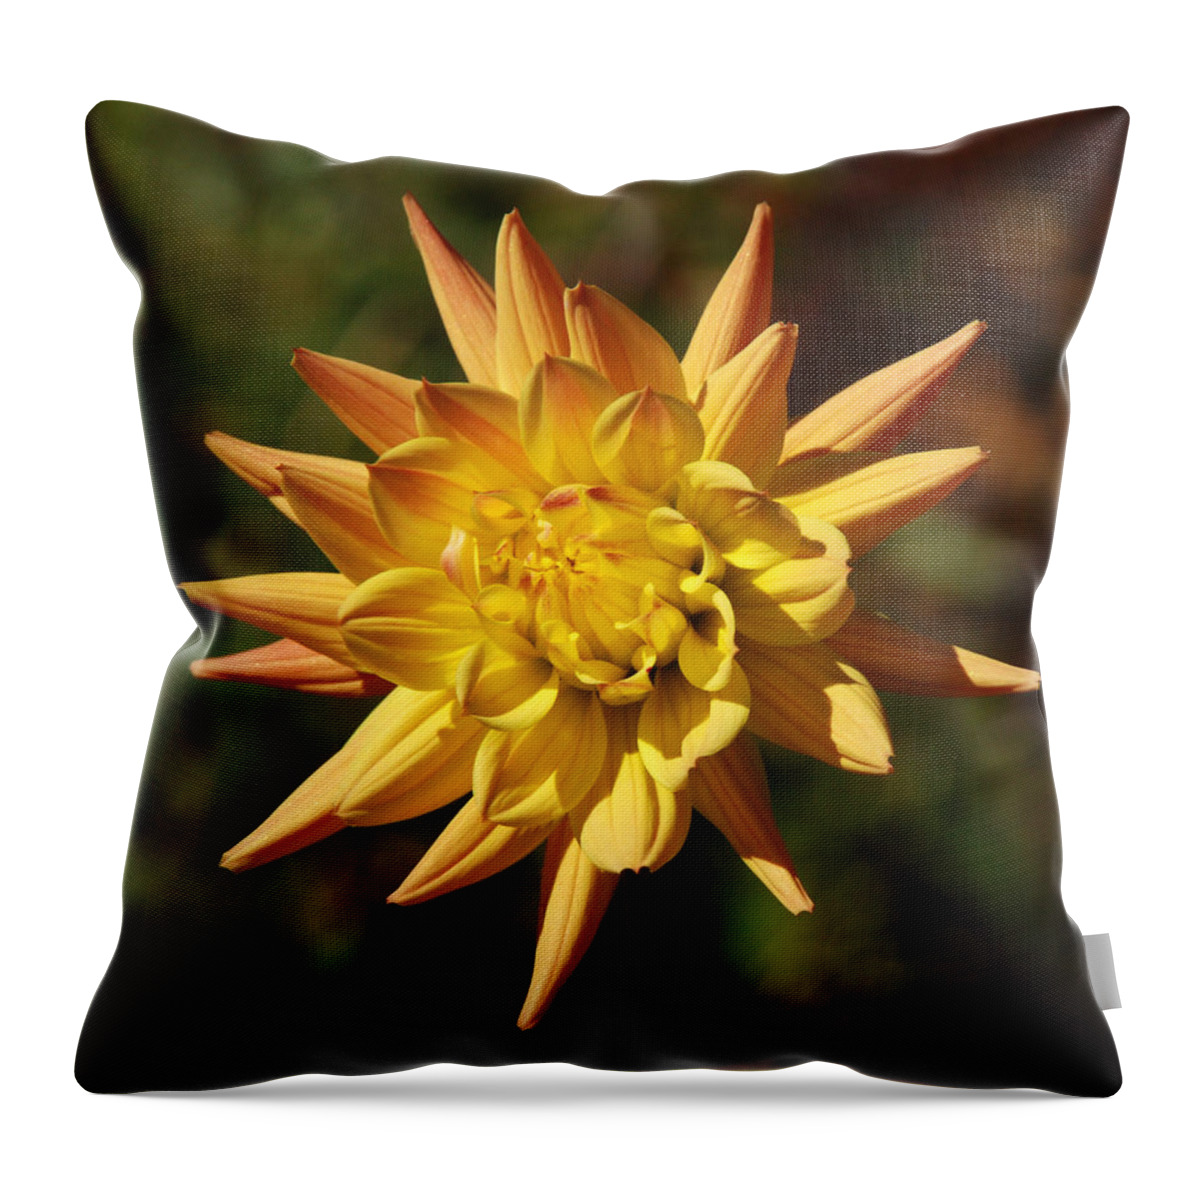 Flower Throw Pillow featuring the photograph Fall Flower by Richard Bryce and Family